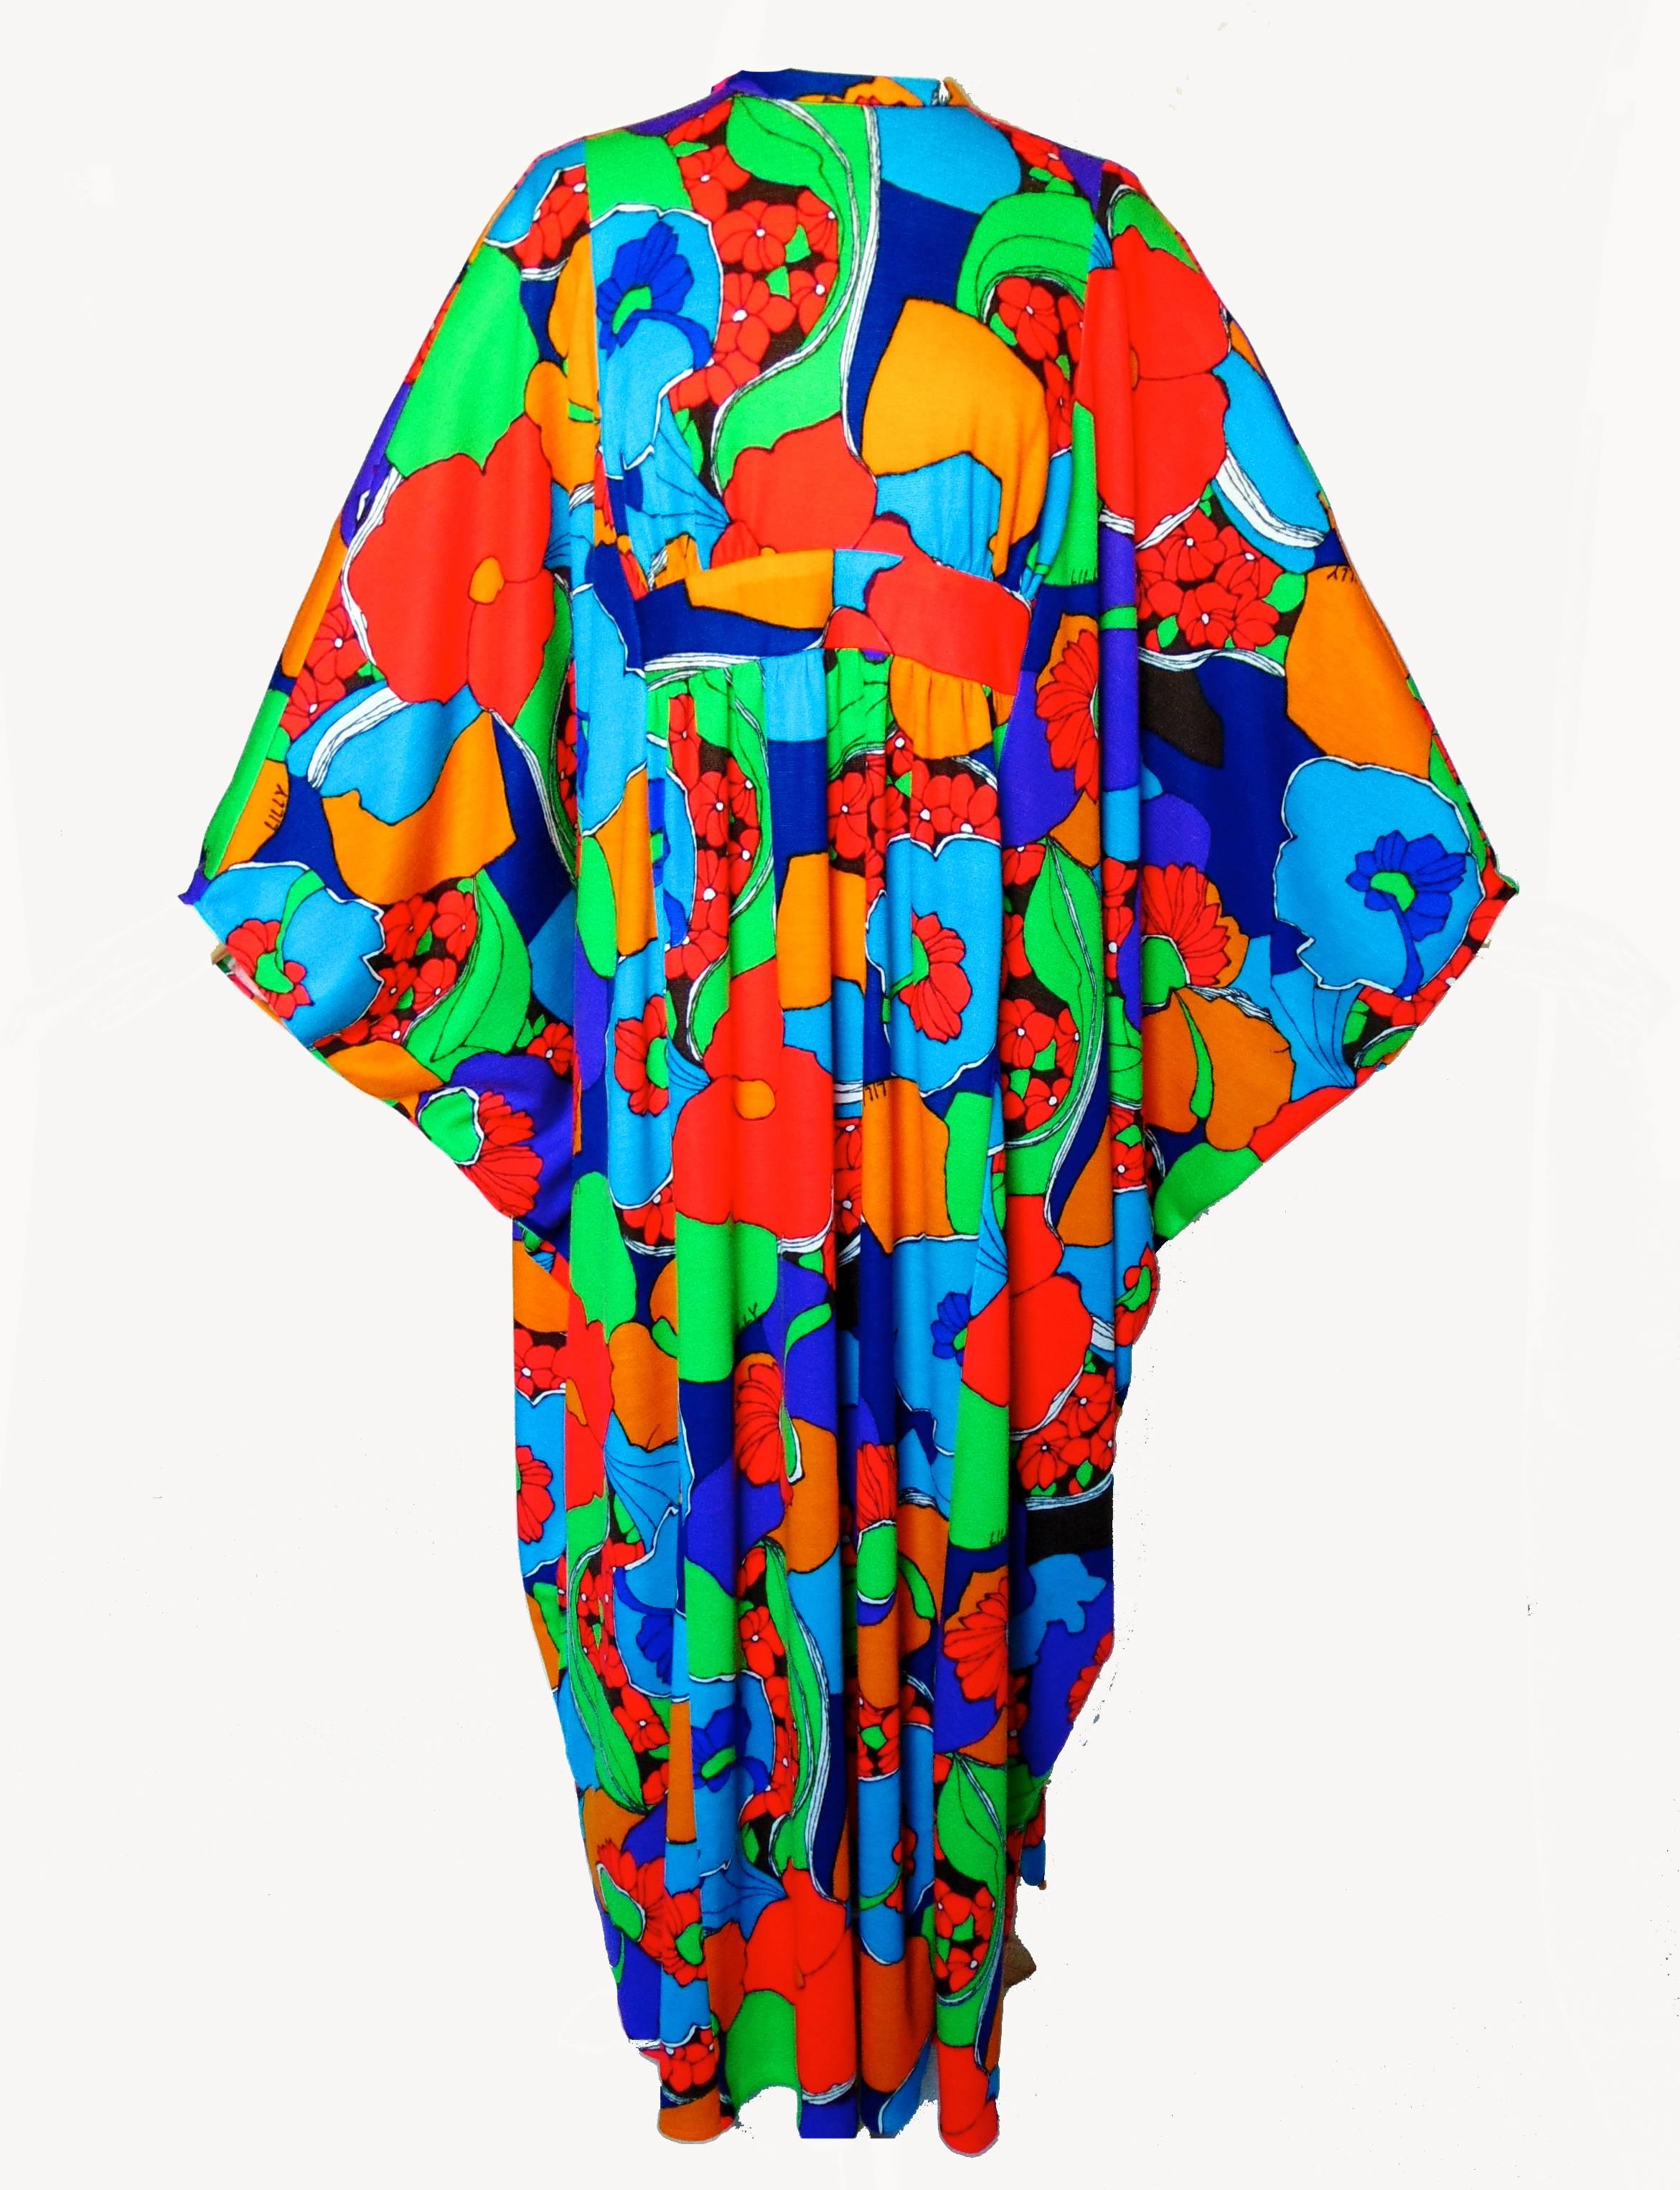 Blue Lilly Pulitzer Kaftan Dress Vibrant Graphic Floral Print One Size Fits Most 70s